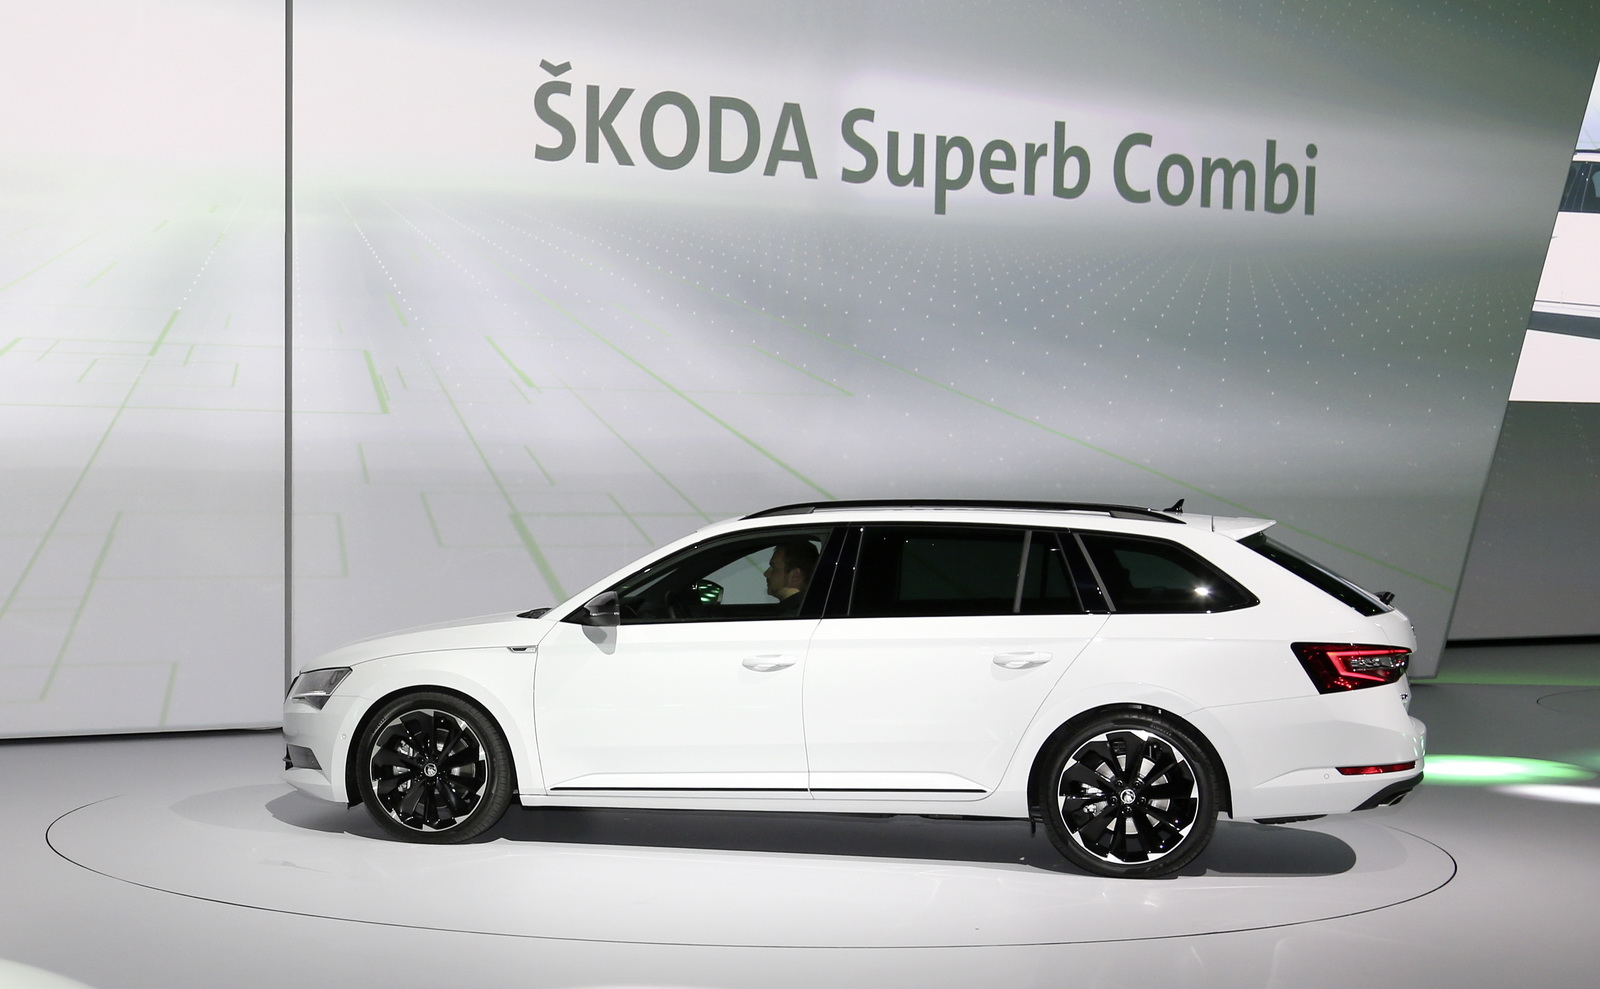 Skoda Gives the Superb A Feistier Look With New SportLine Version | Carscoops1600 x 989